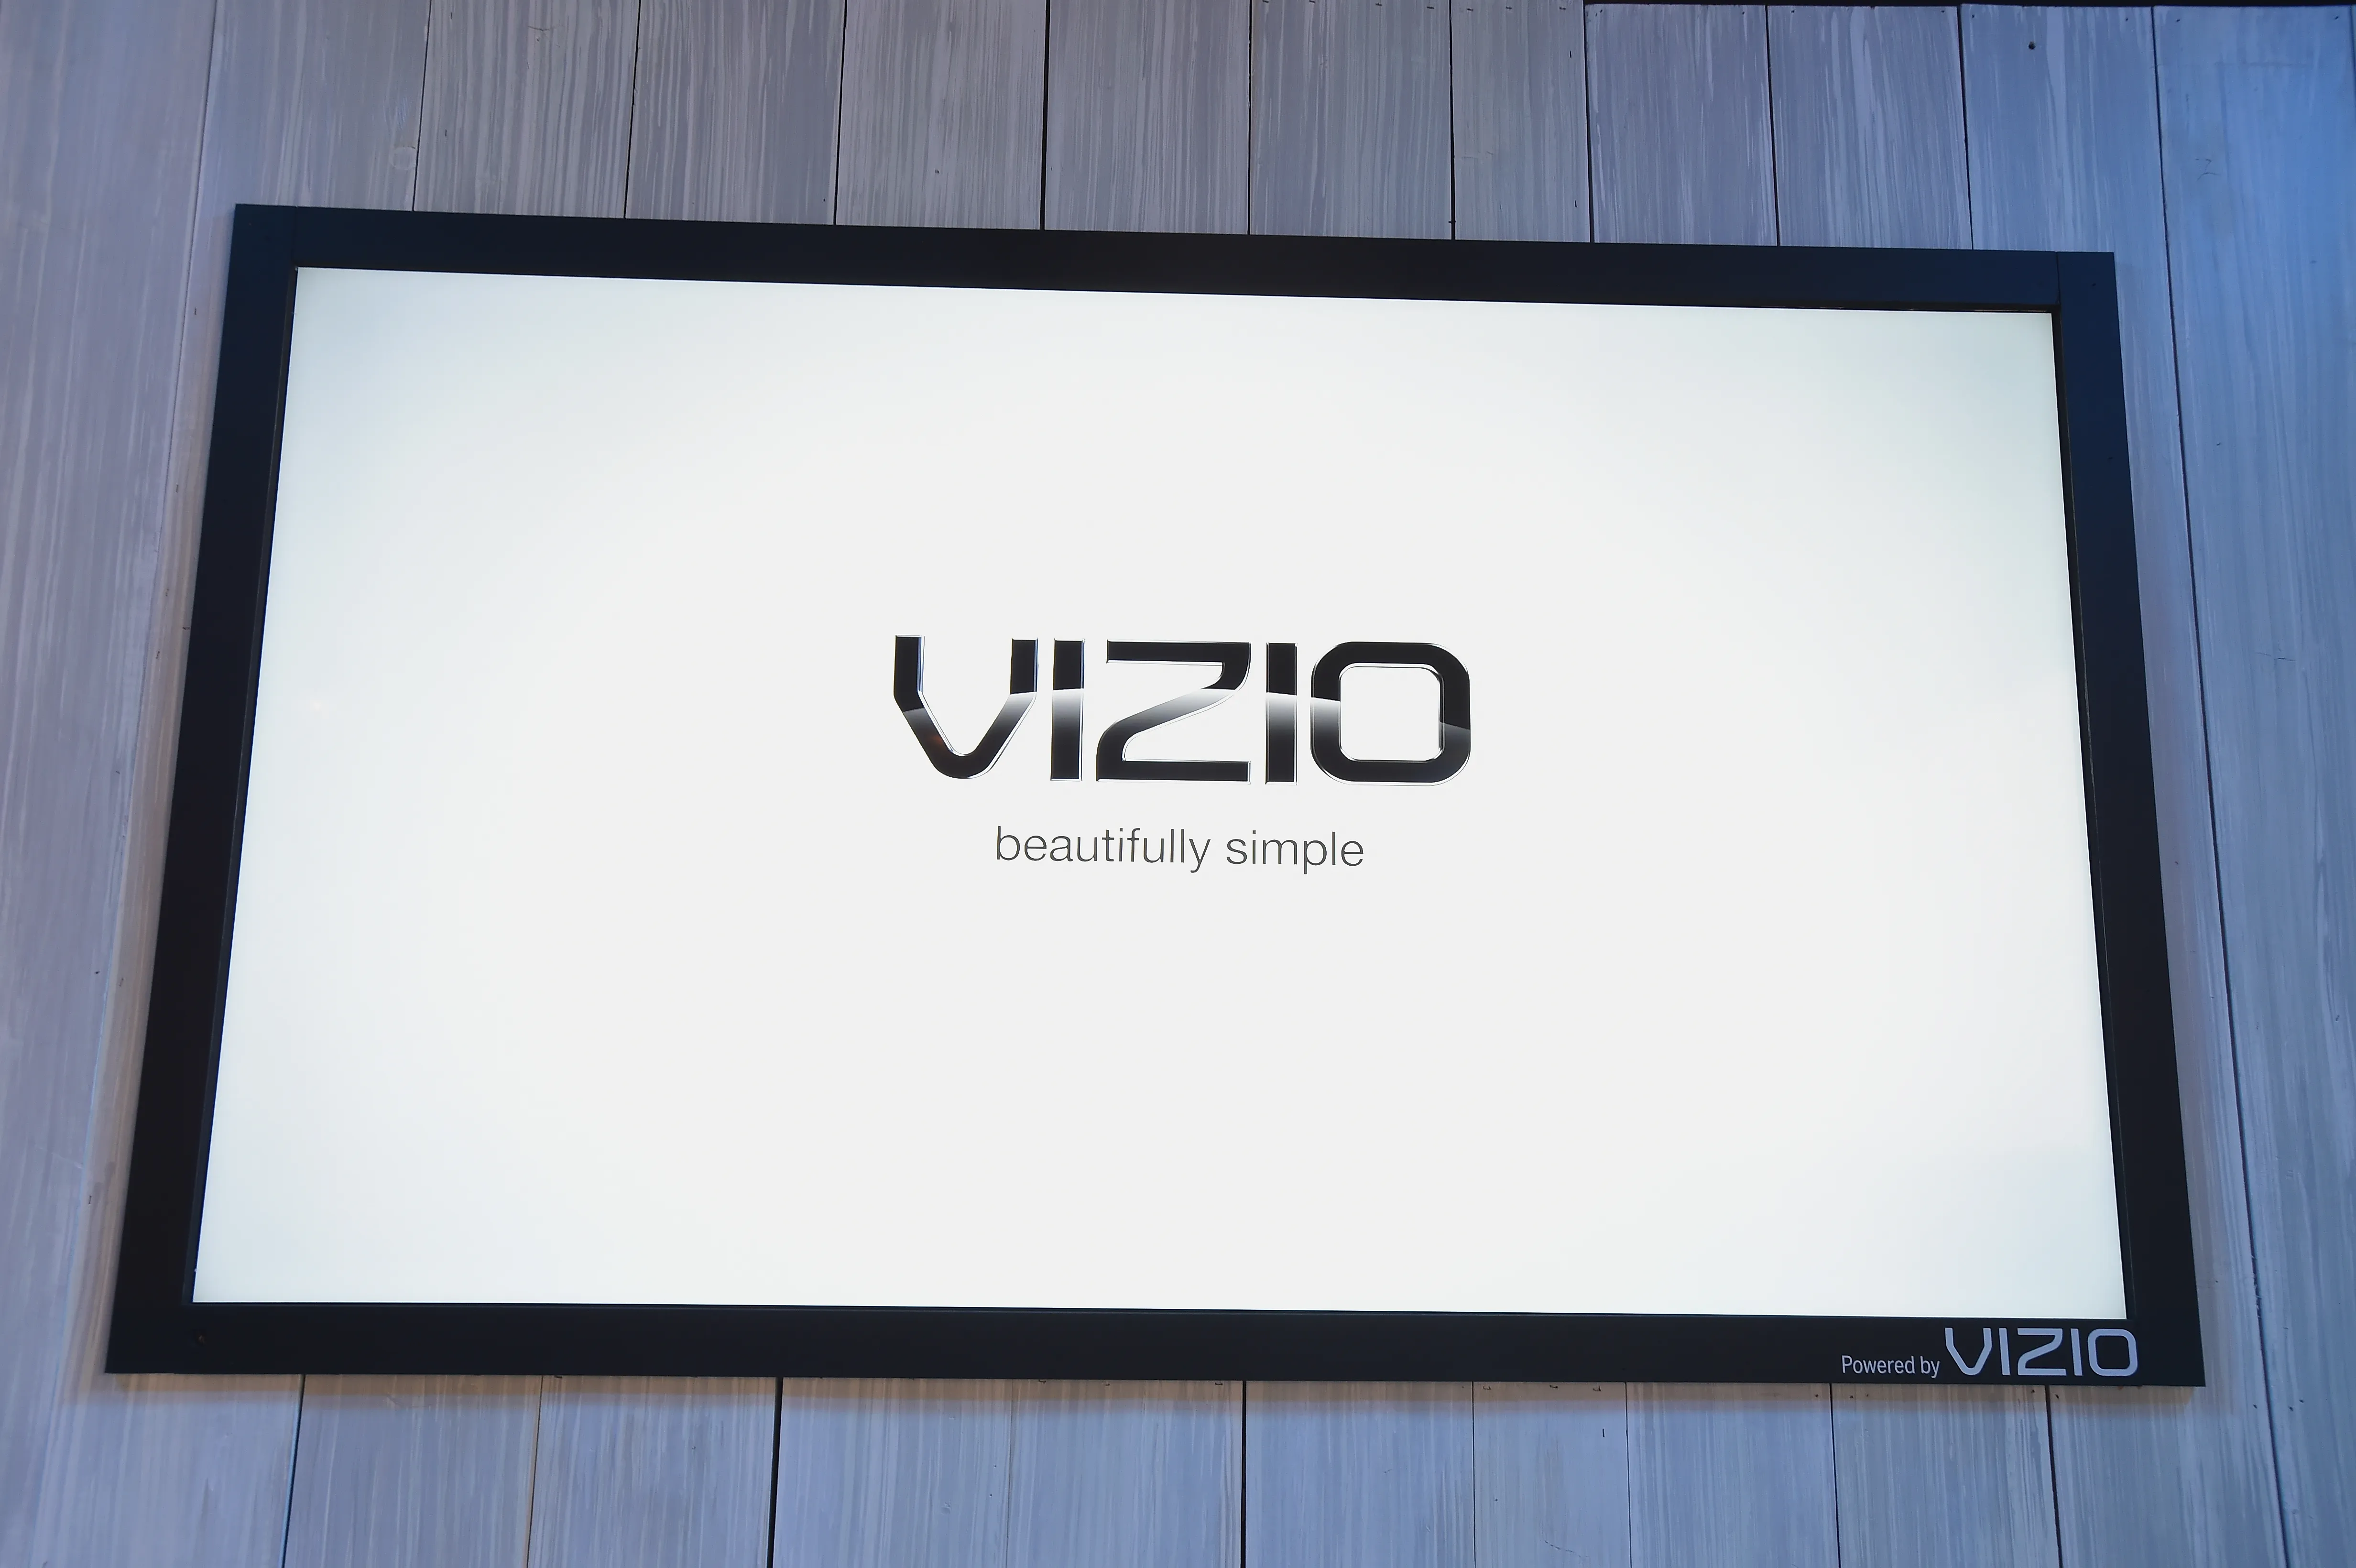 If You Have a Vizio TV, It's Watching You Too